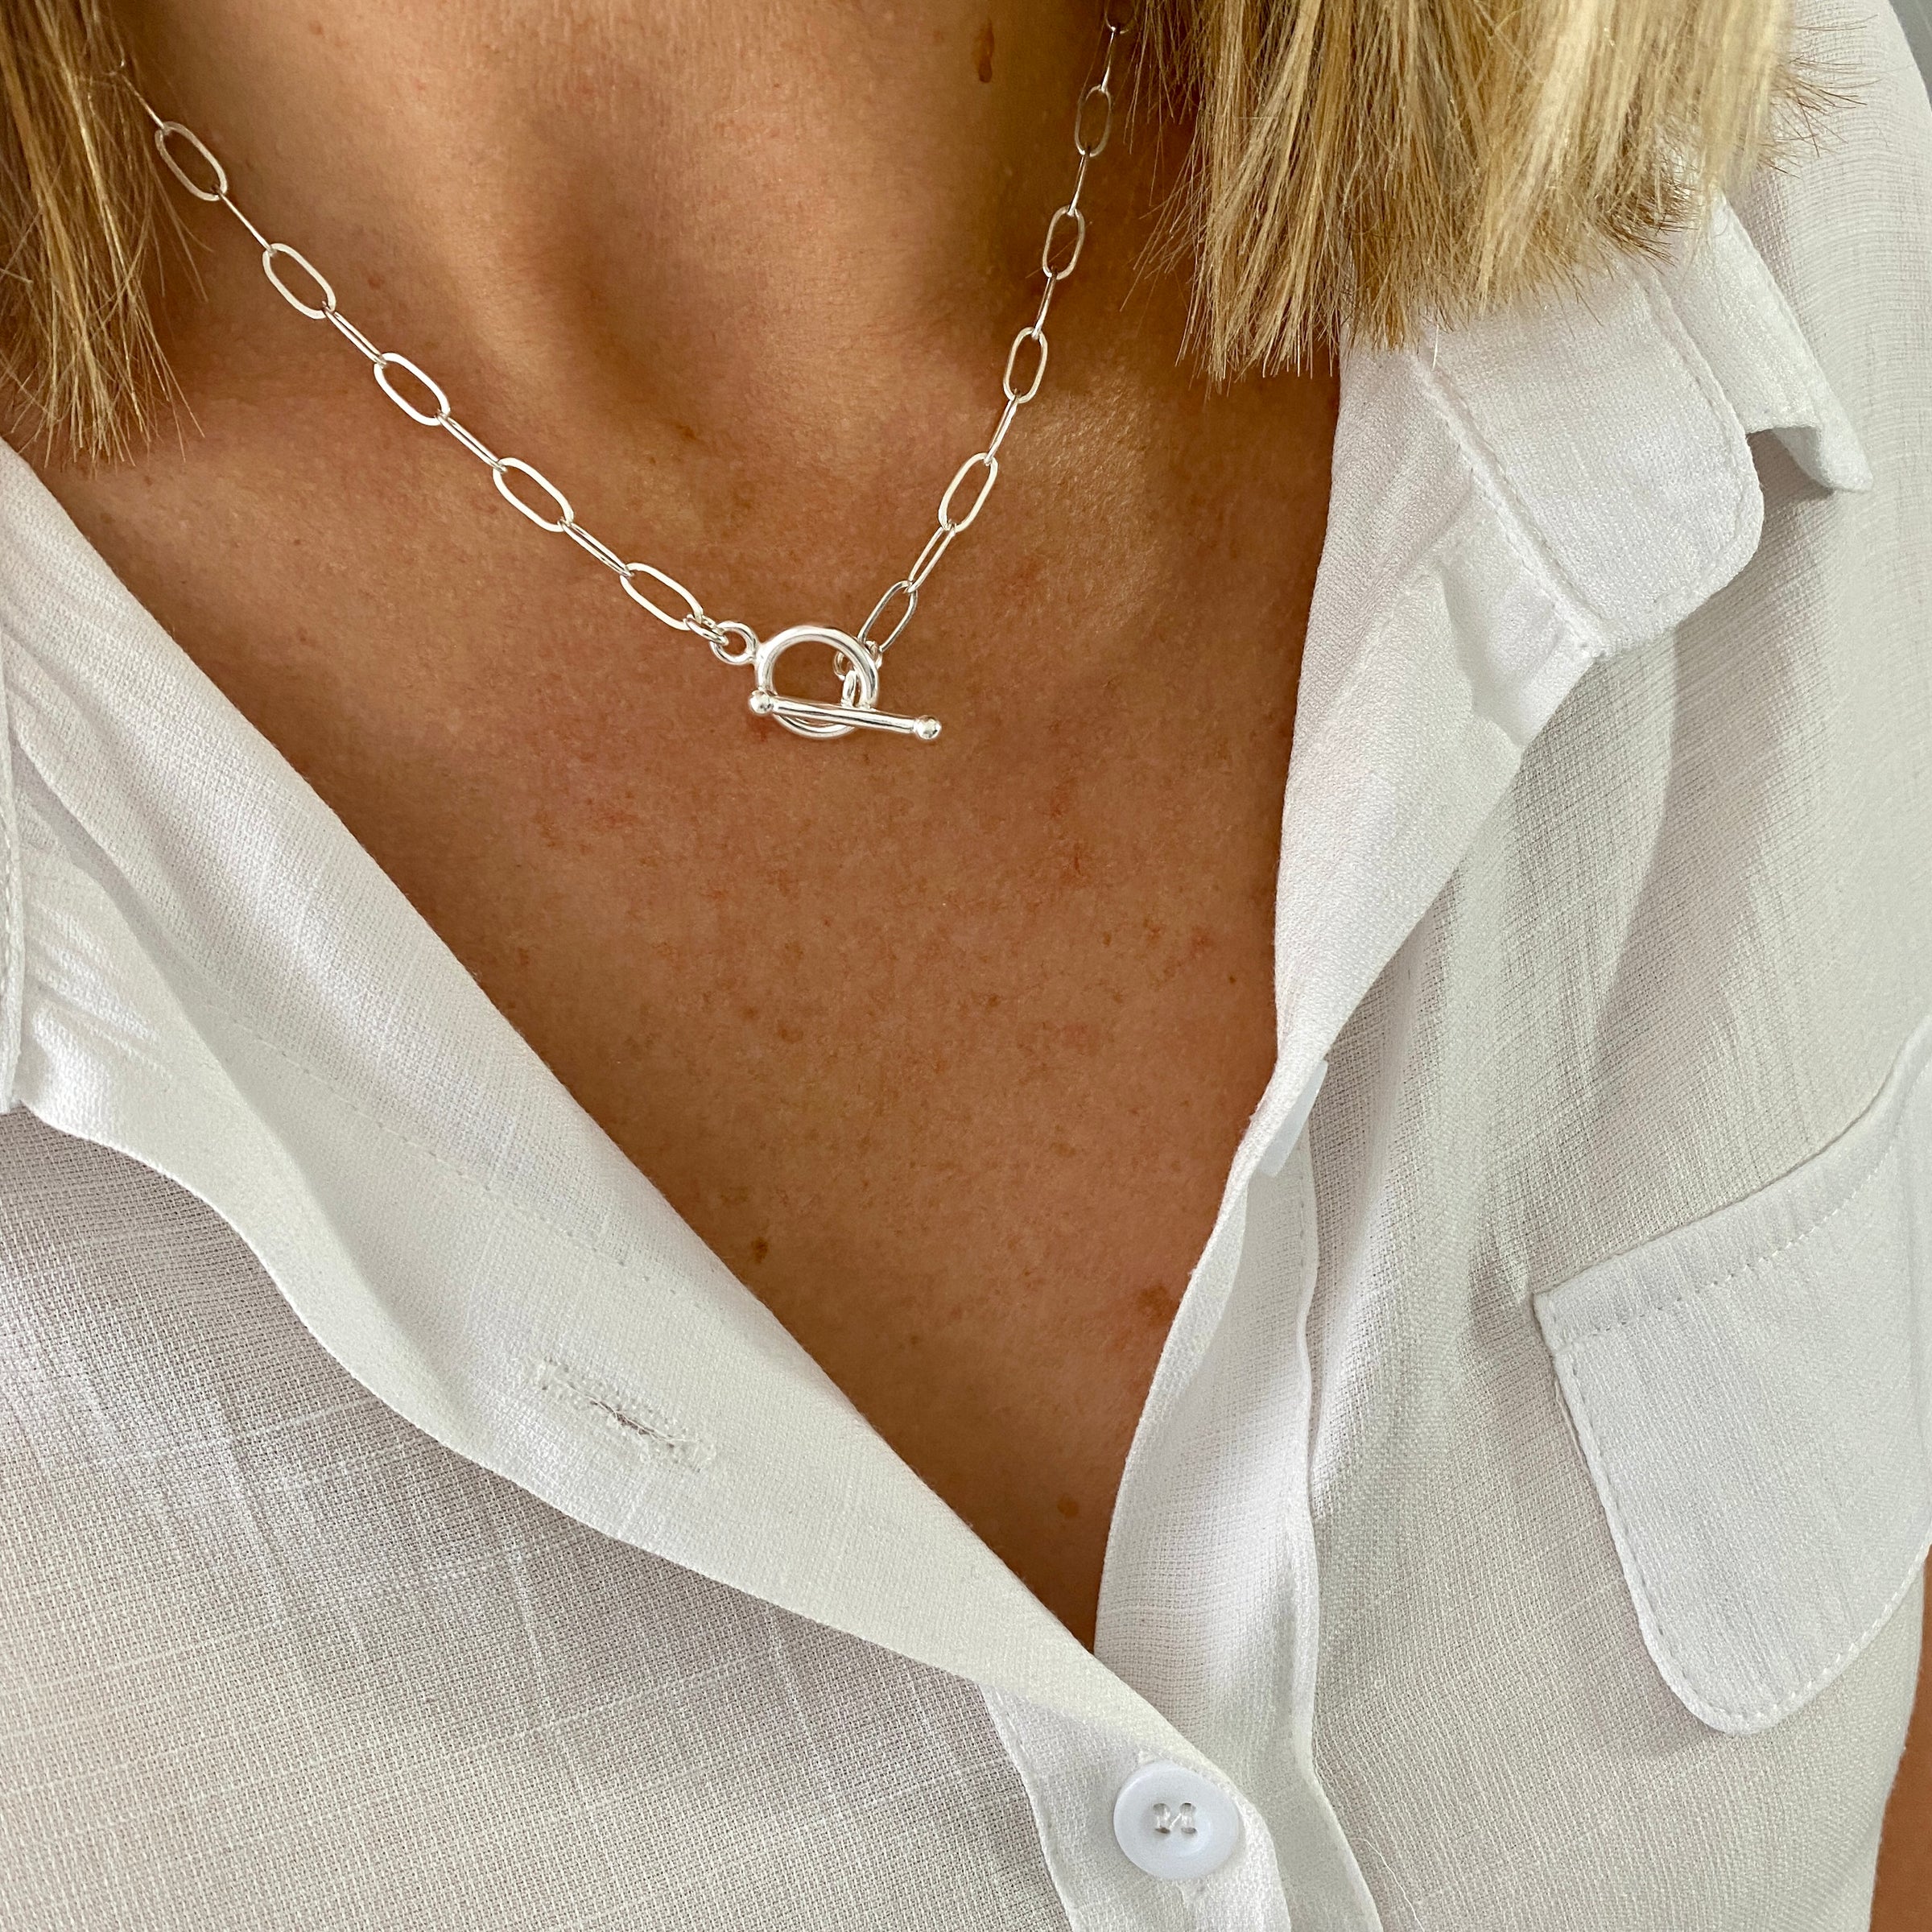 Hammered heart on t bar necklace | Annie Smith